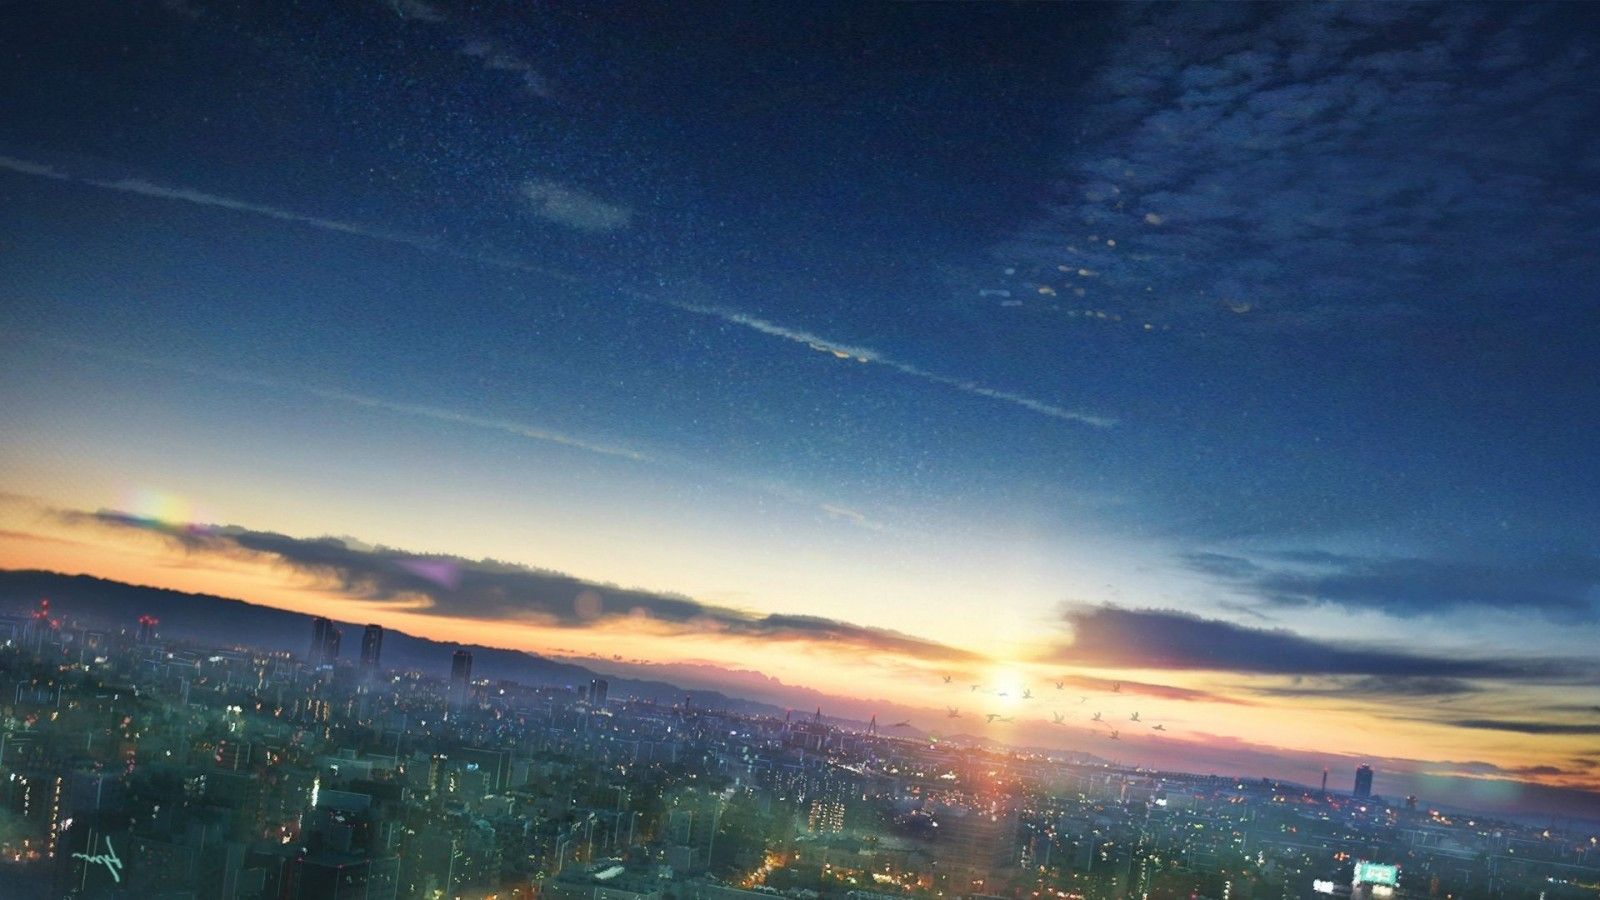 Wallpaper, sunlight, sunset, cityscape, night, anime, sky, sunrise, evening, morning, Sun, horizon, dusk, cloud, dawn, 1920x1080 px, atmosphere of earth, afterglow, astronomical object 1920x1080